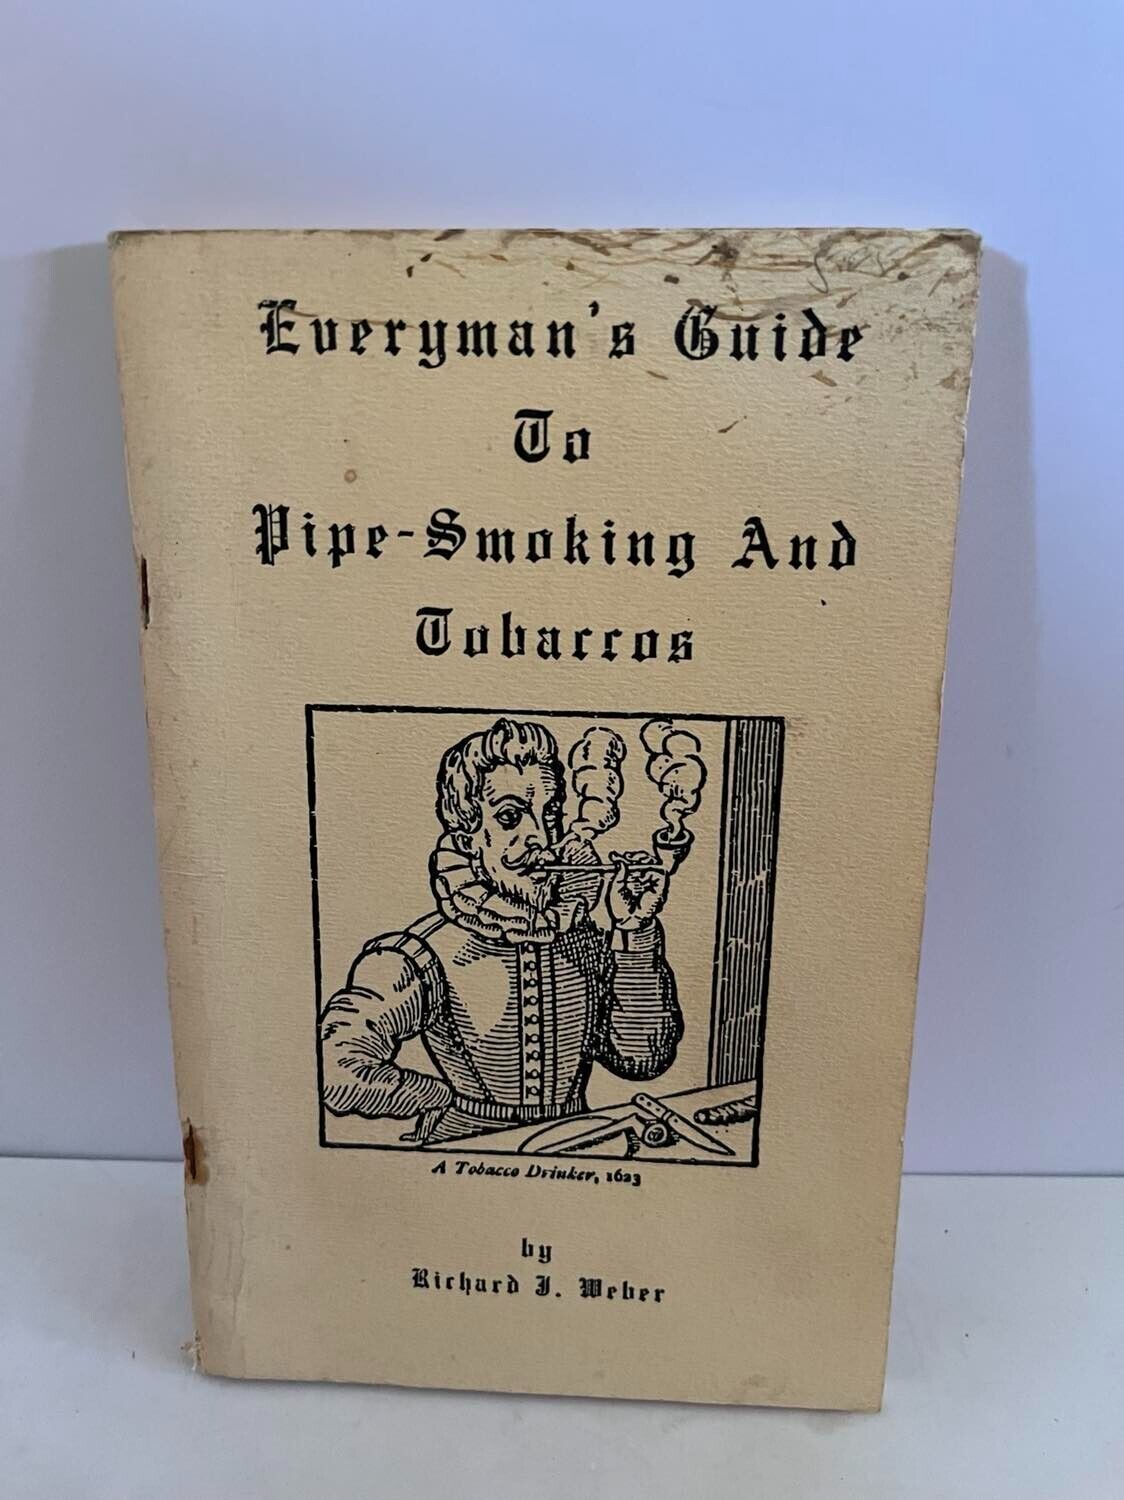 Everyman's Guide to Pipe-Smoking and Tobaccos by Richard J. Weber Copyright 1983